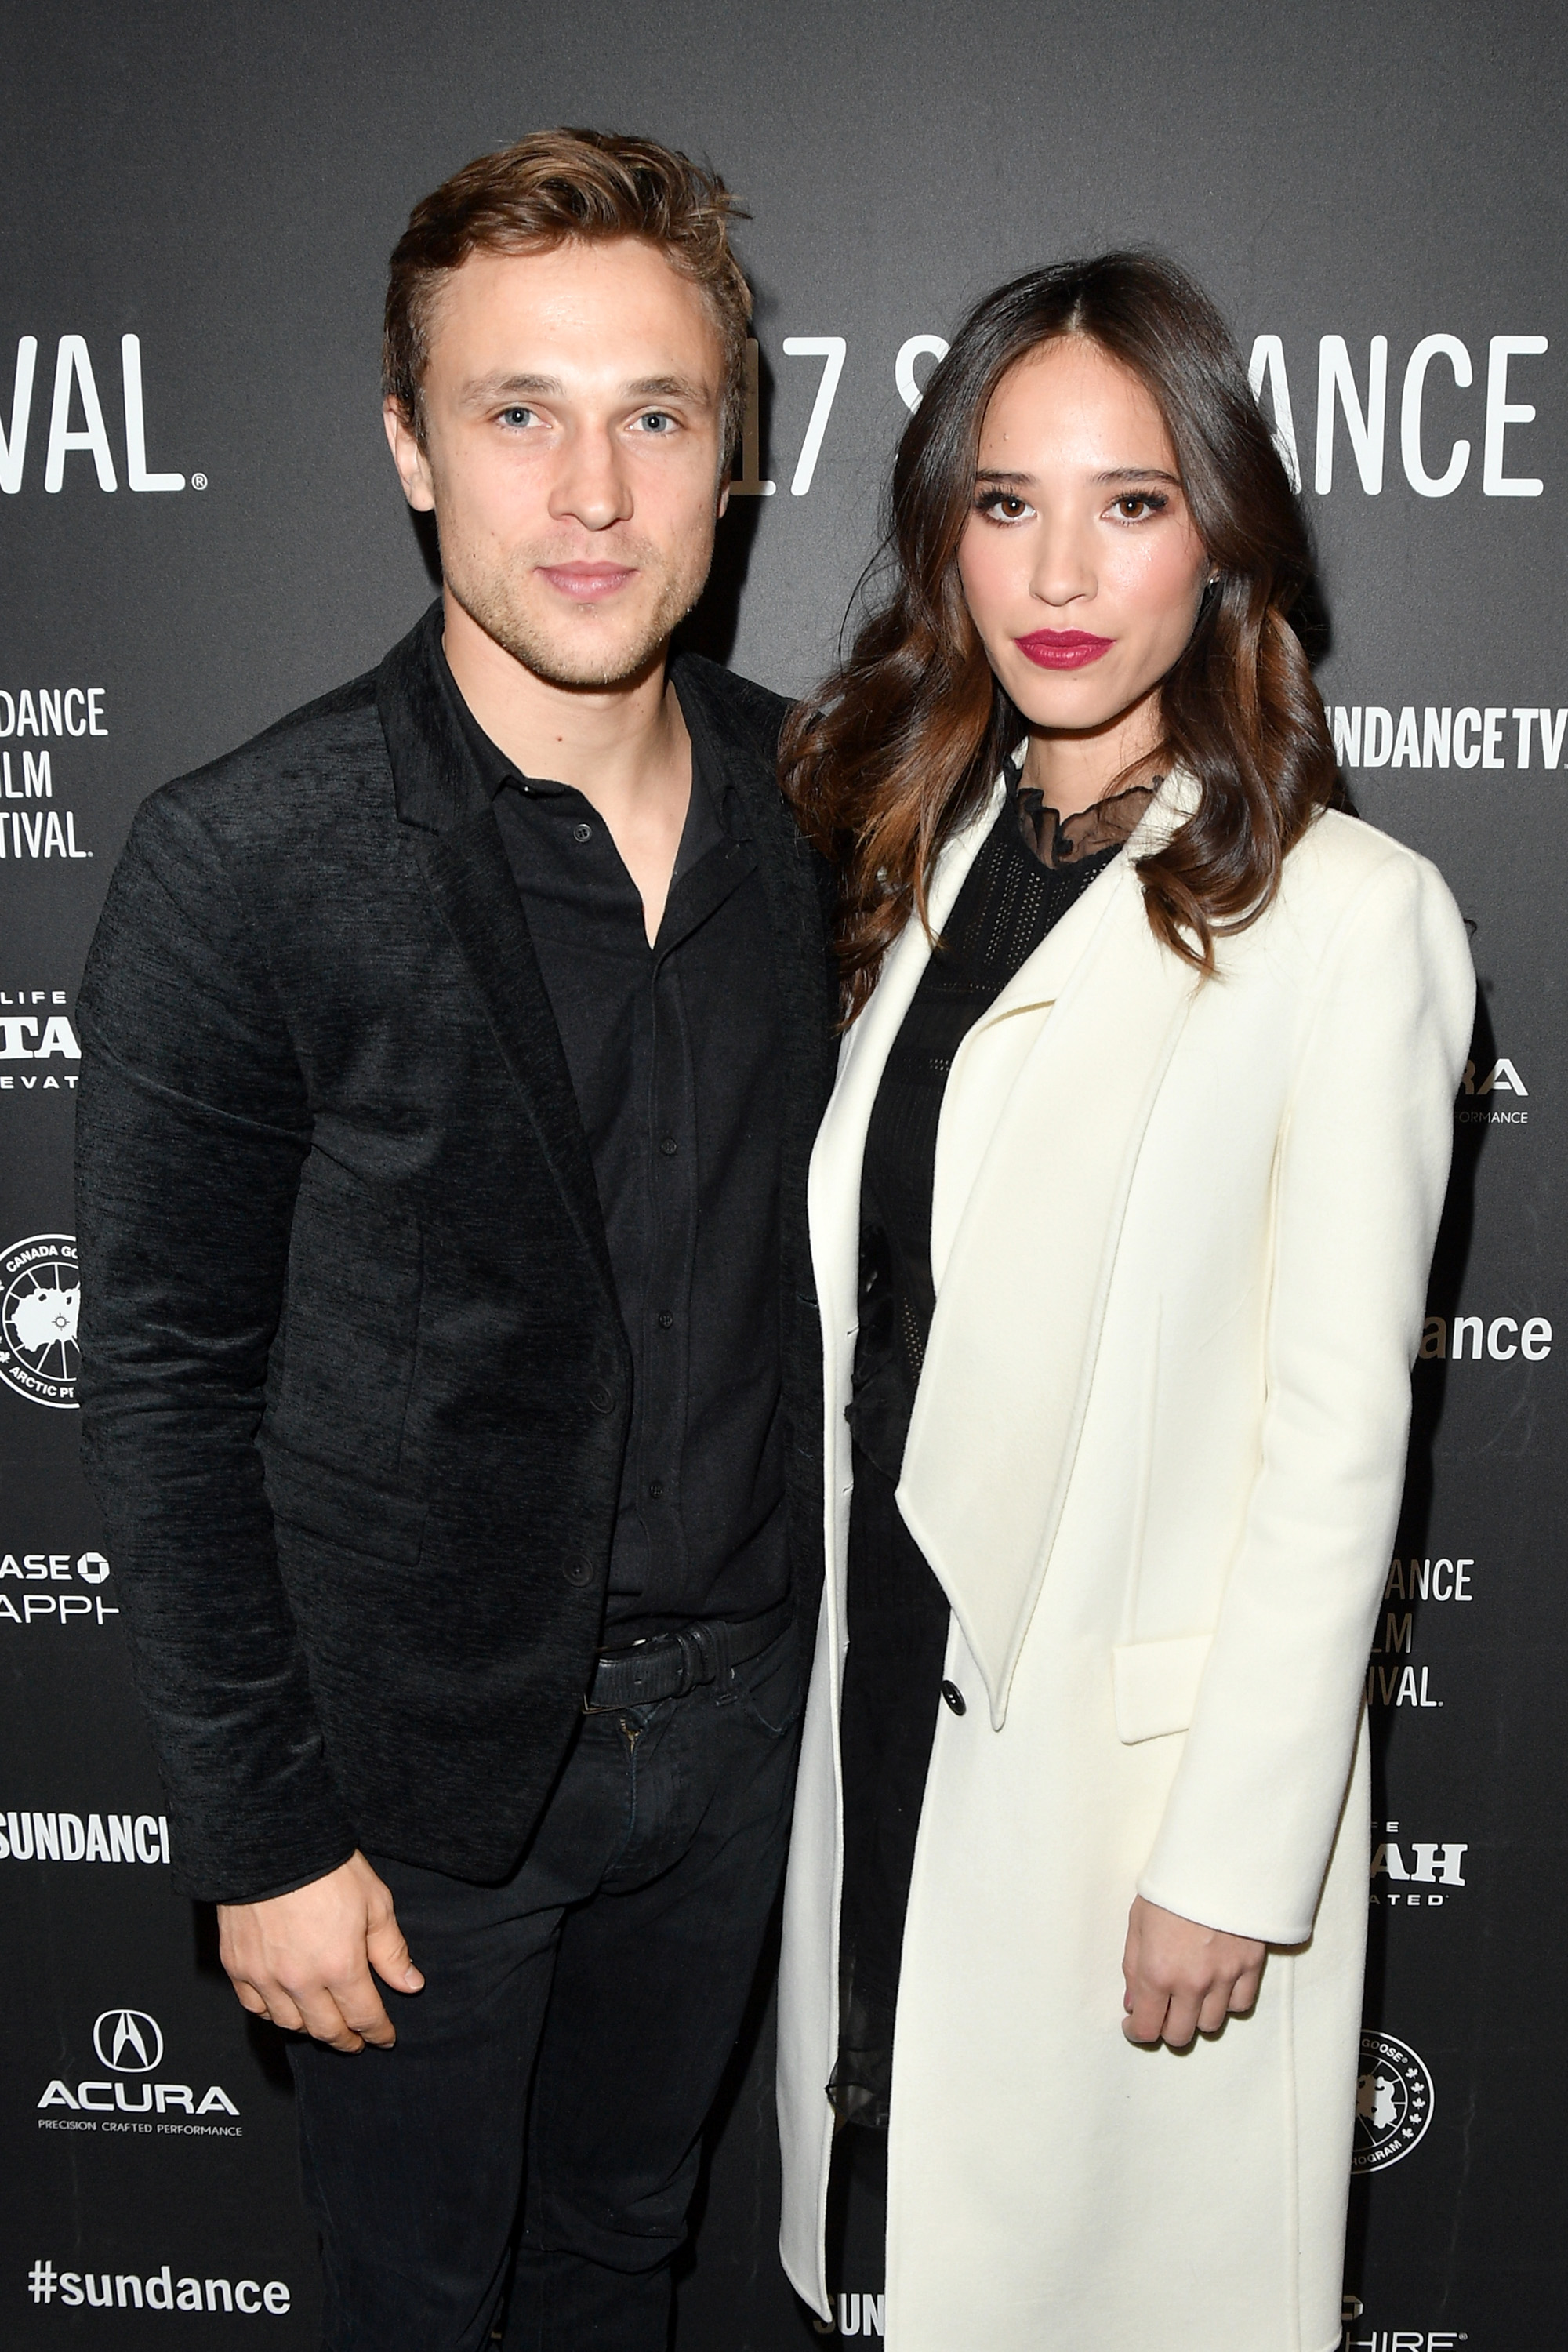 William Moseley and Kelsey Asbille at the premiere of "Wind River" during the 2017 Sundance Film Festival on January 21, 2017, in Park City, Utah. | Source: Getty Images